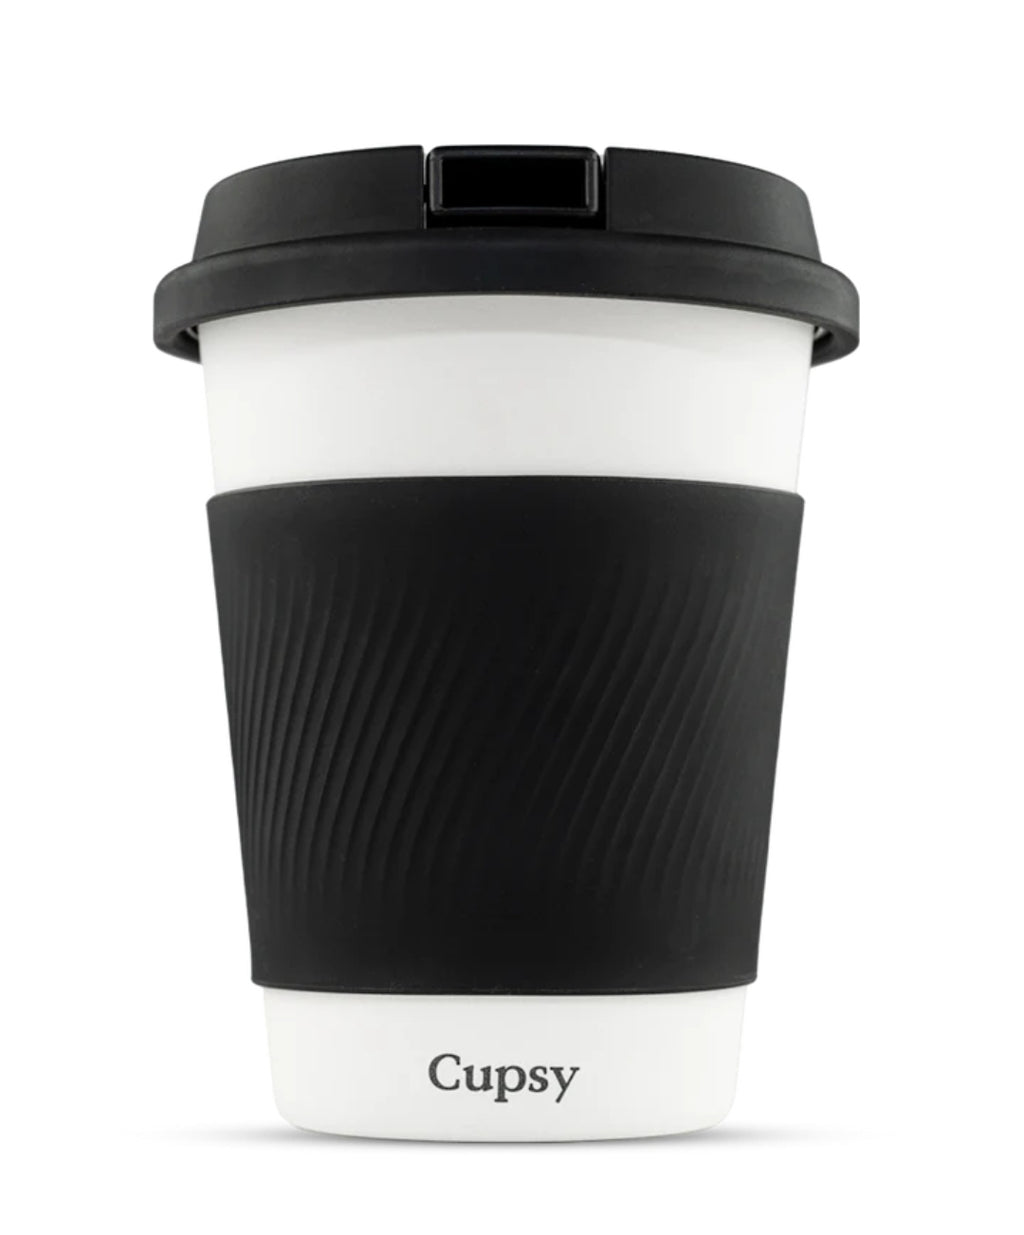 Cupsy